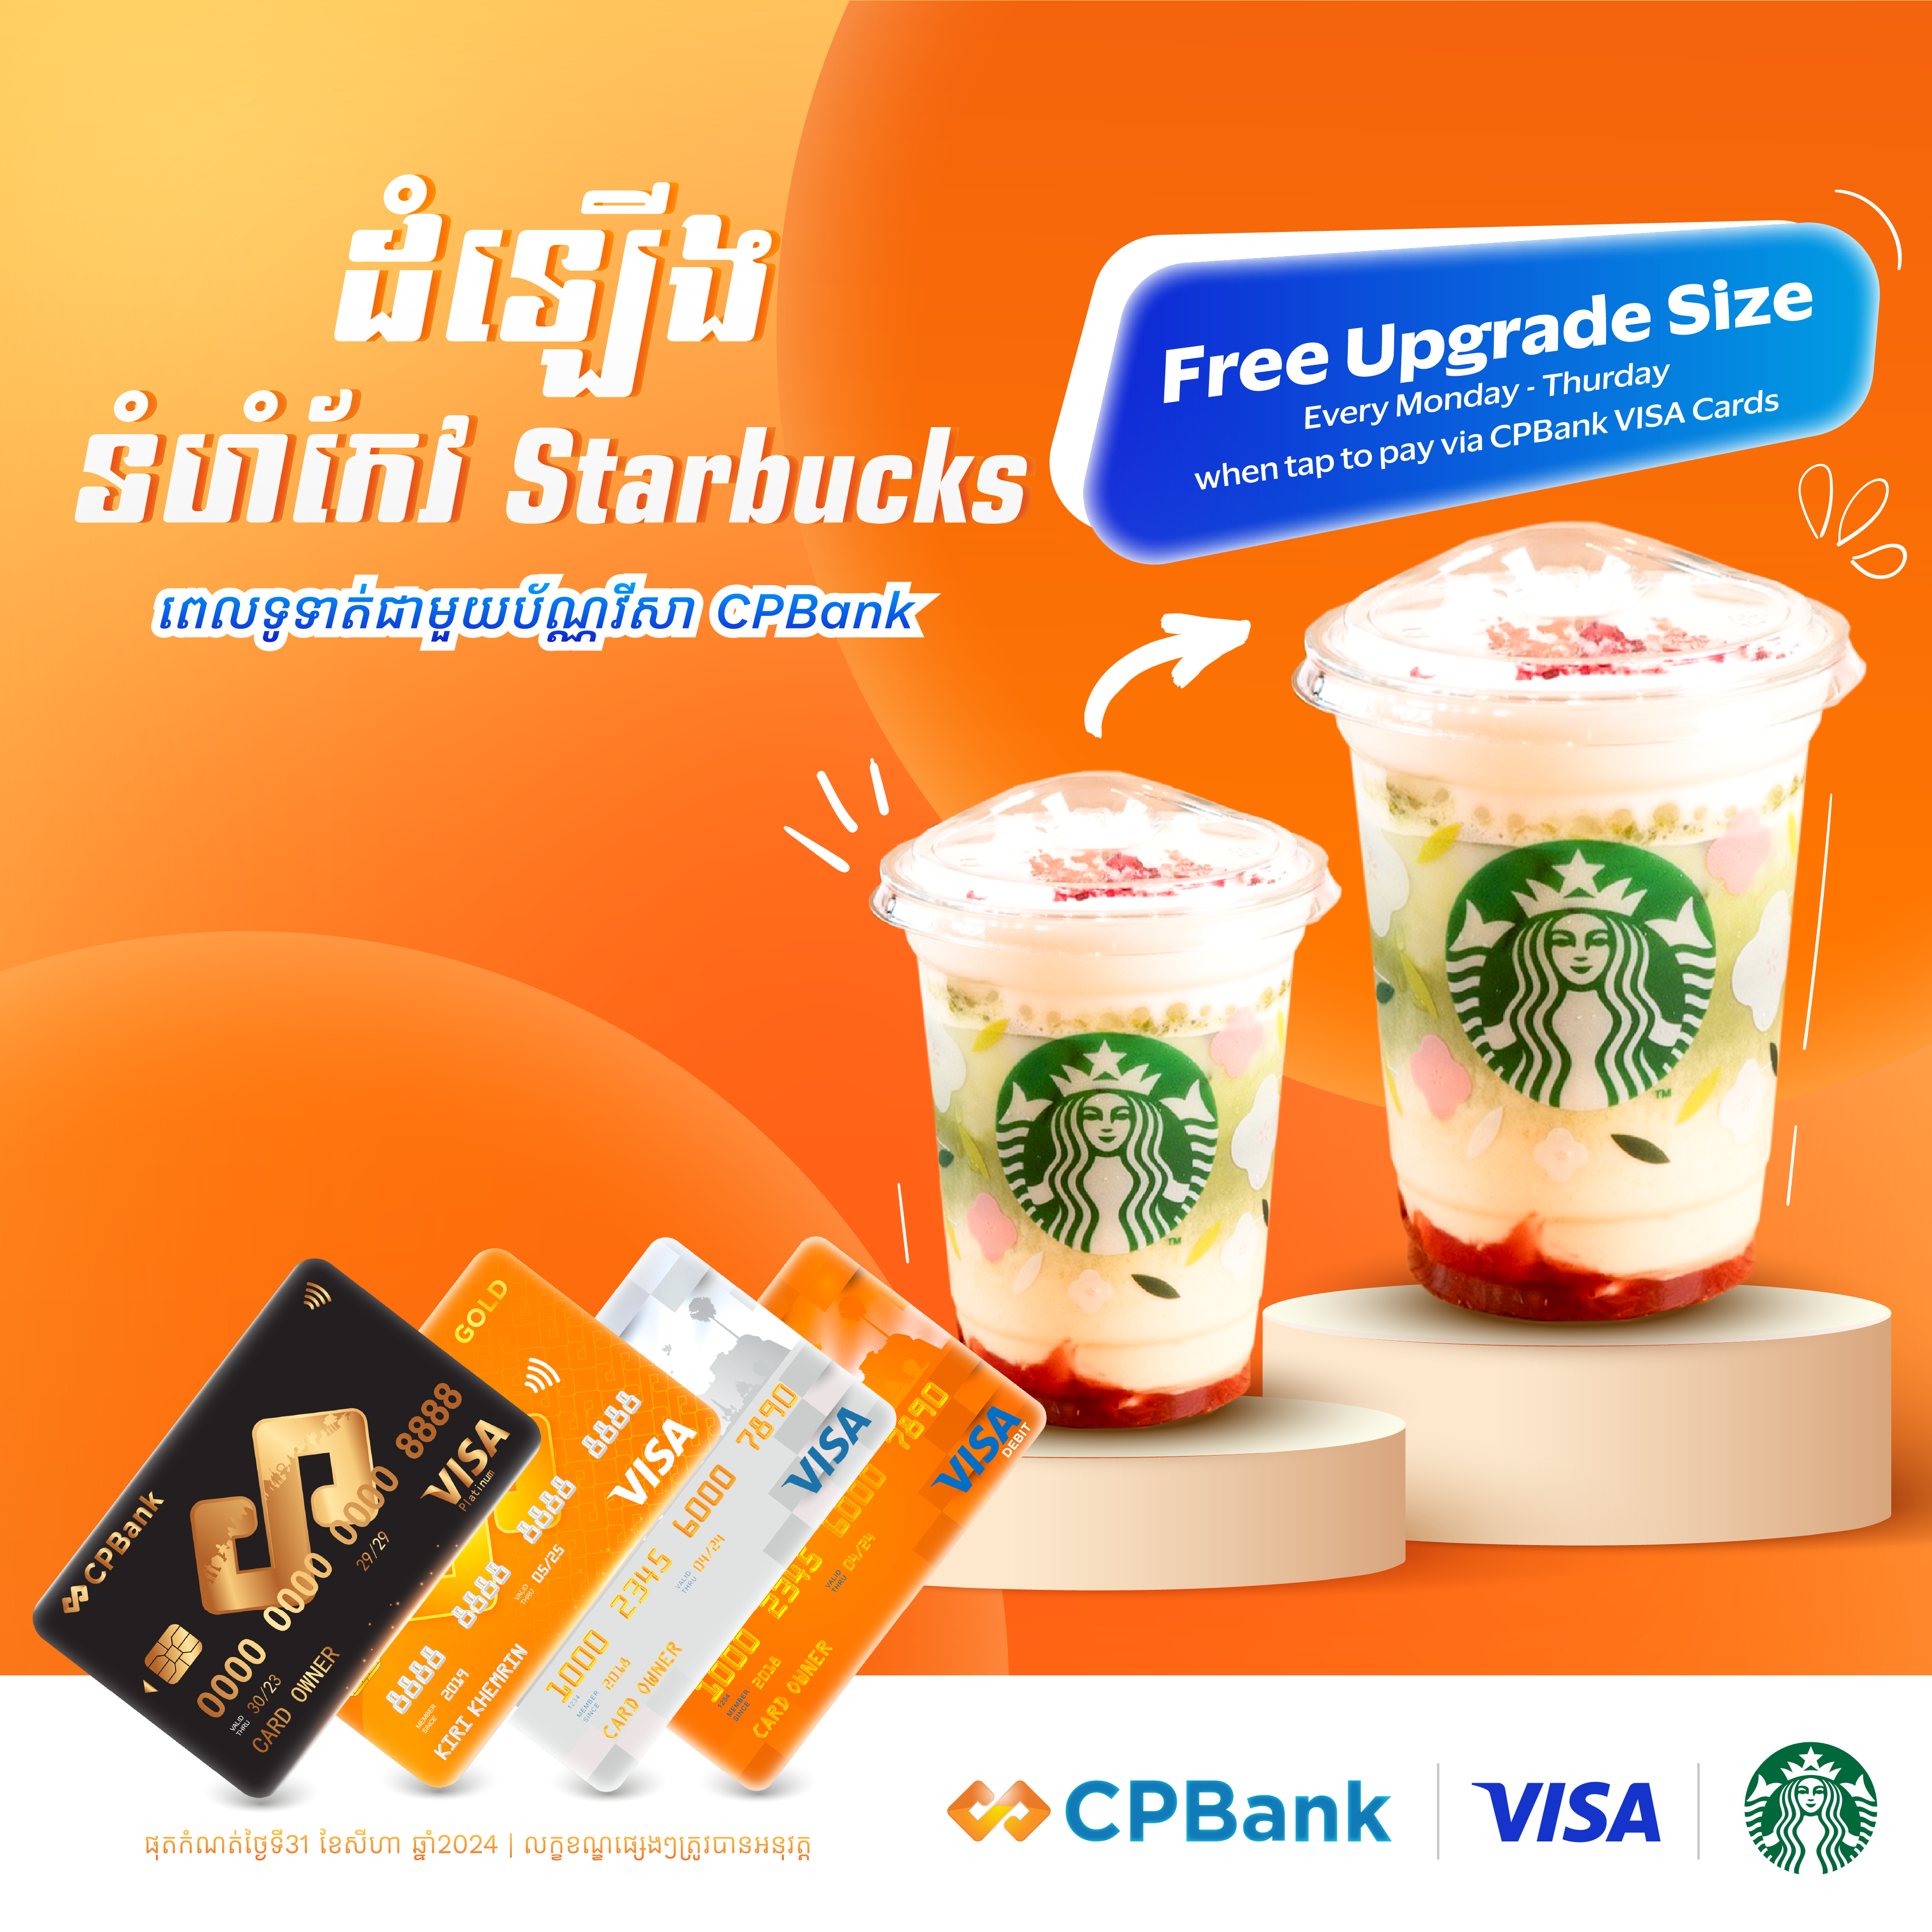 Free upgrade size of Starbucks with CPBank VISA Cards